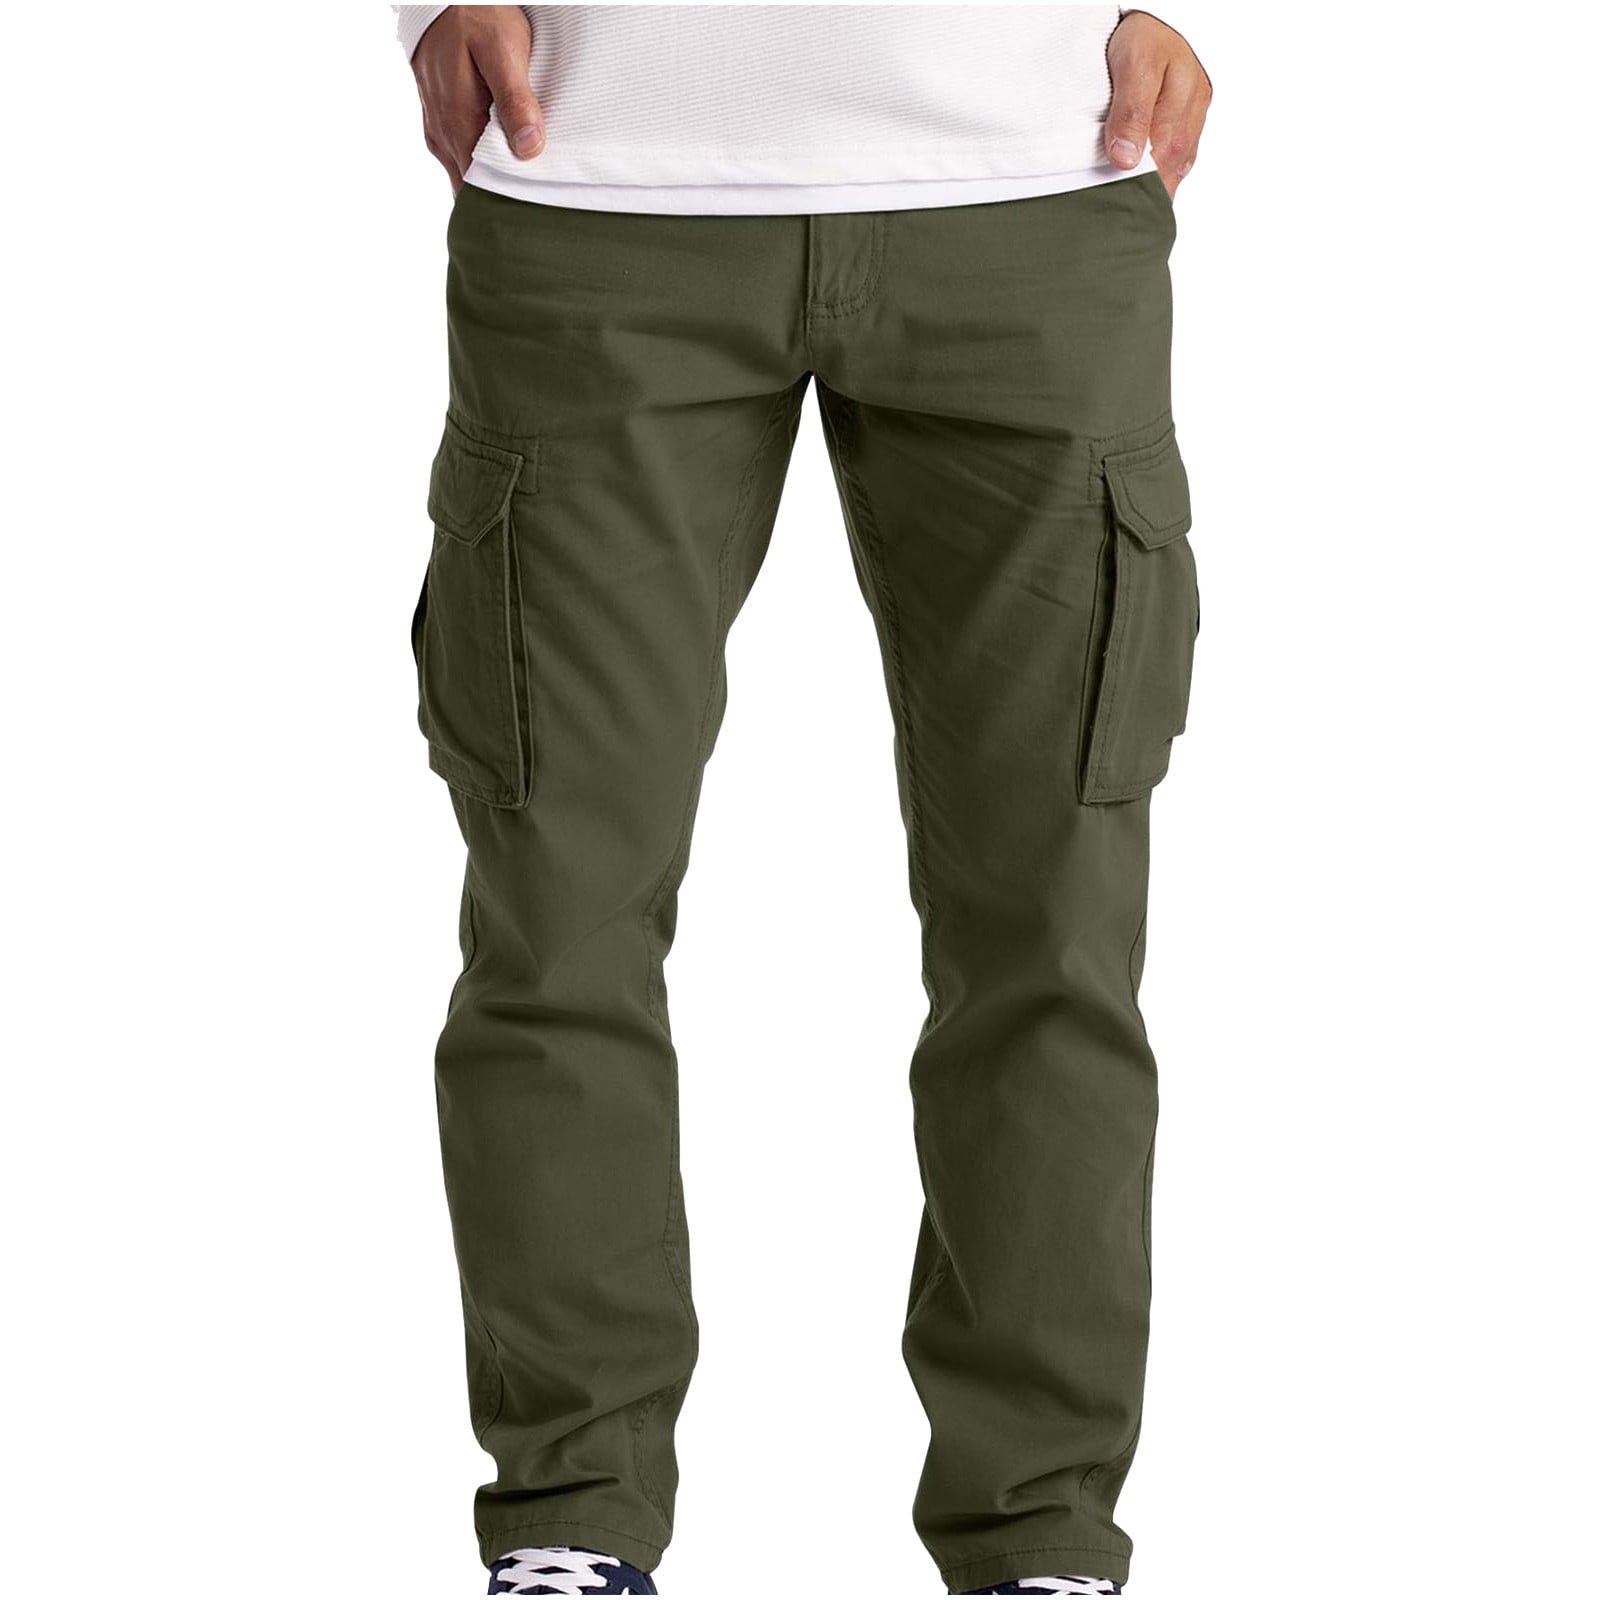 RQYYD Cargo Pants for Mens Lightweight Work Pants Hiking Ripstop Cargo  Pants Cargo Pant-Reg and Big and Tall Sizes(Army Green,M)